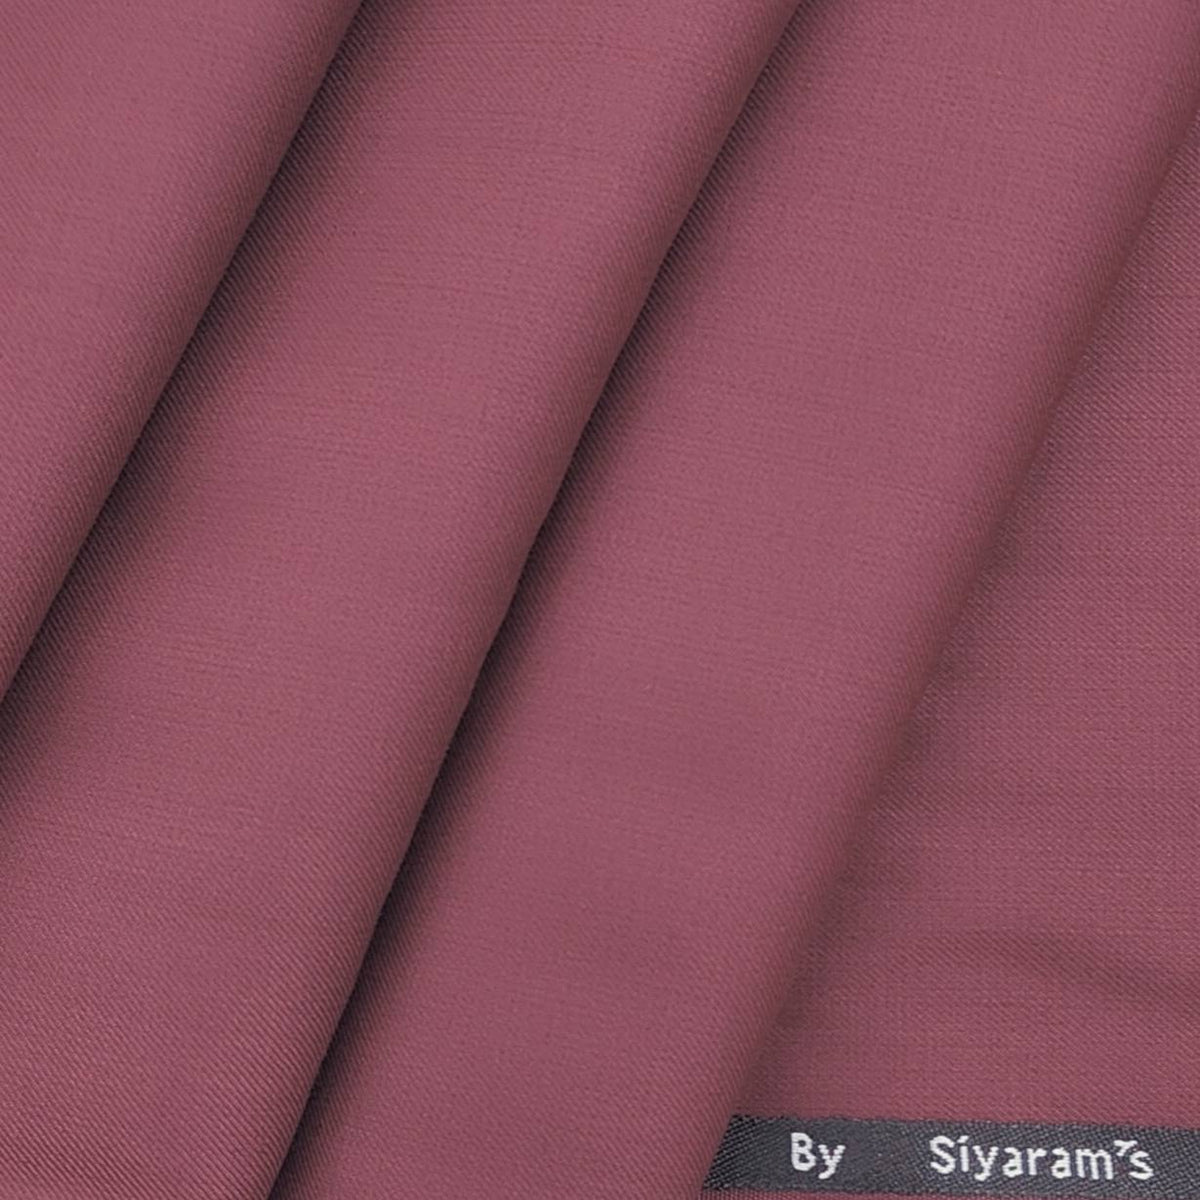 Siyaram Premium Solid Maroon Unstitched Trouser Fabric for Men